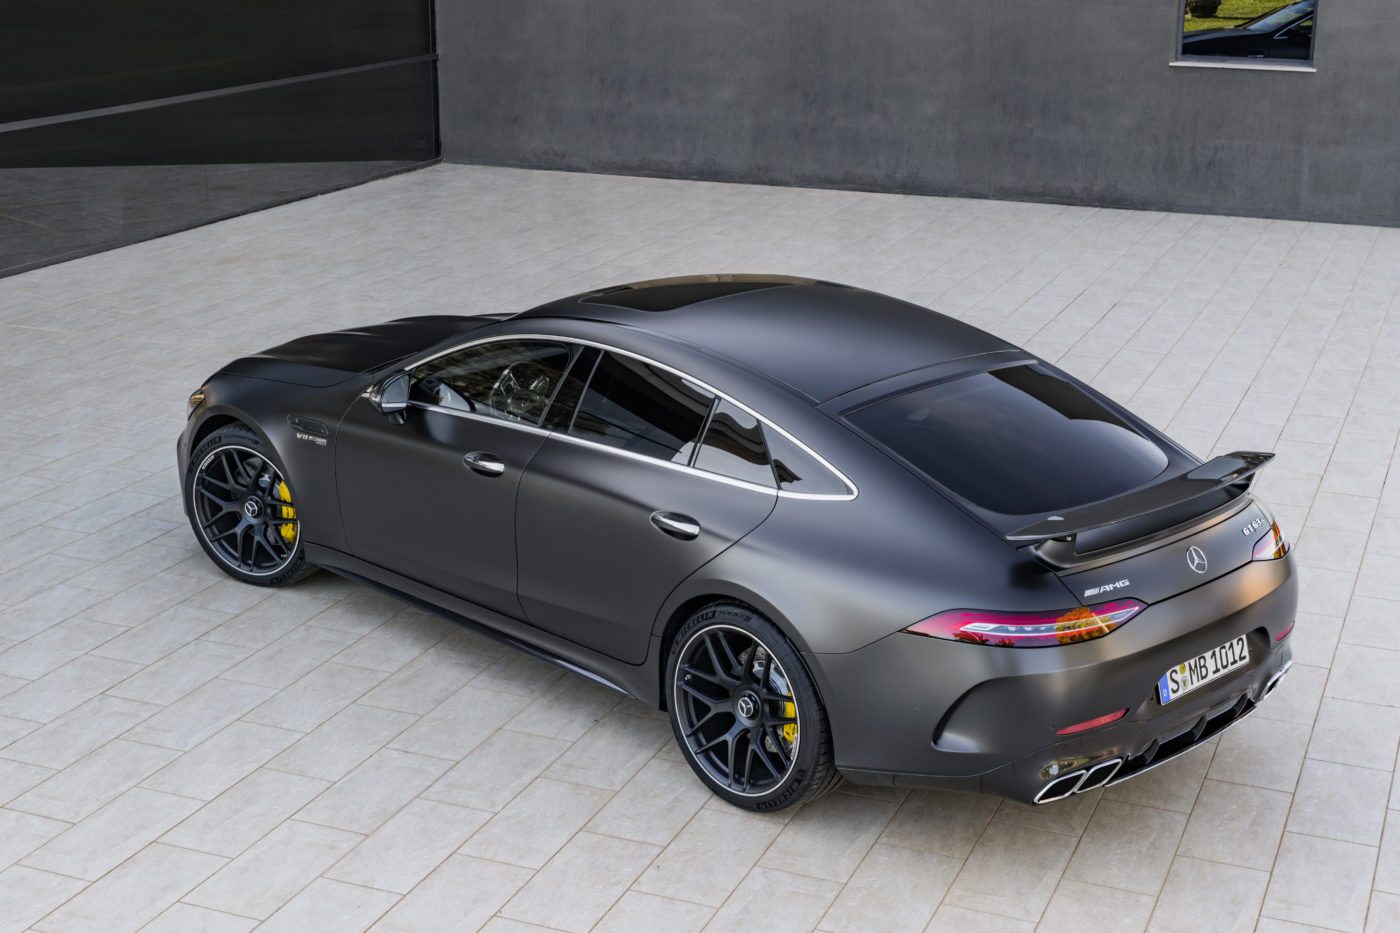 Mercedes Amg Gt 4 Door Coupe Can Now Be Ordered